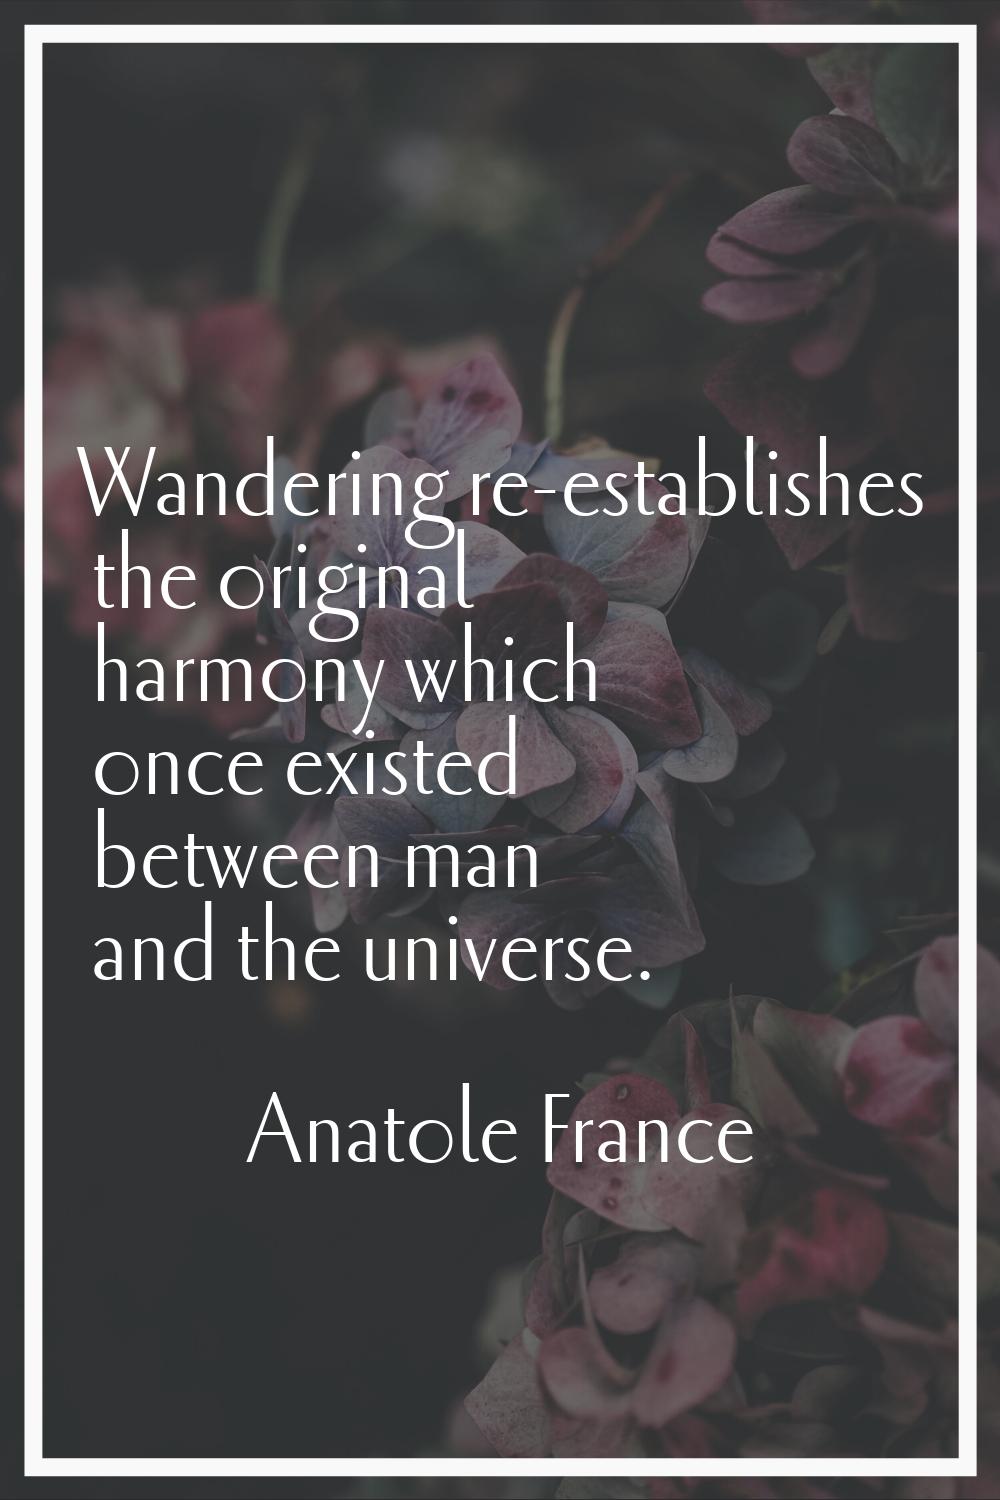 Wandering re-establishes the original harmony which once existed between man and the universe.